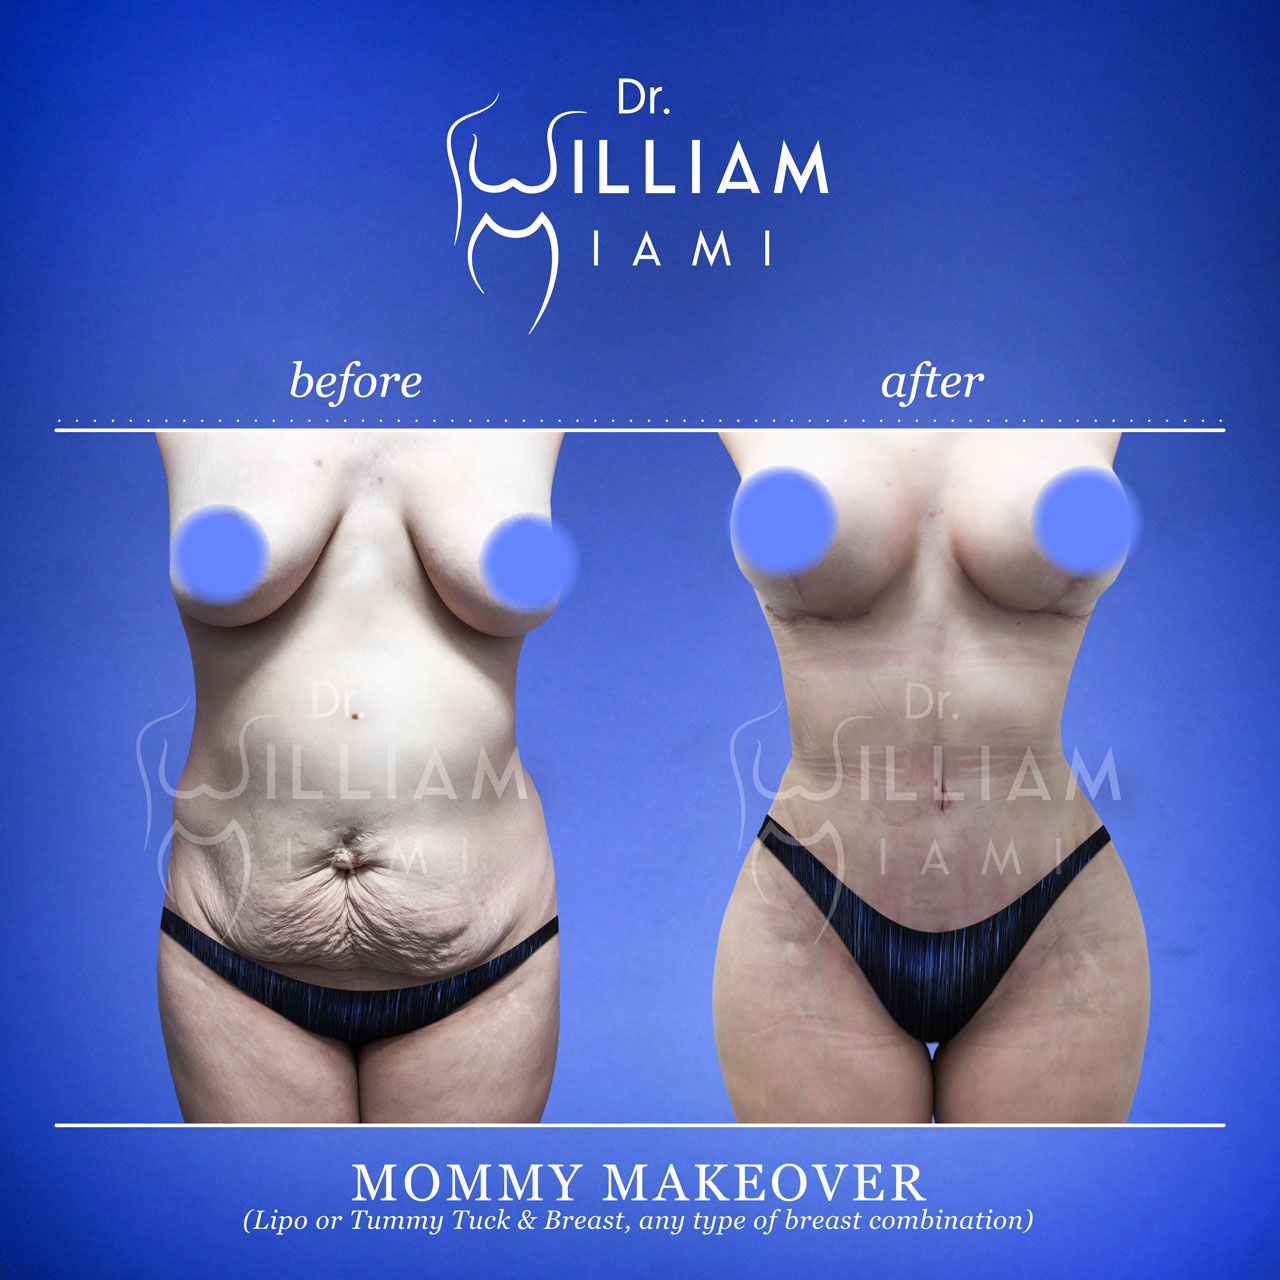 Mommy Makeover Miami - Mommy Makeovers in Miami (Tummy Tuck, Breast Lift &  Liposuction)